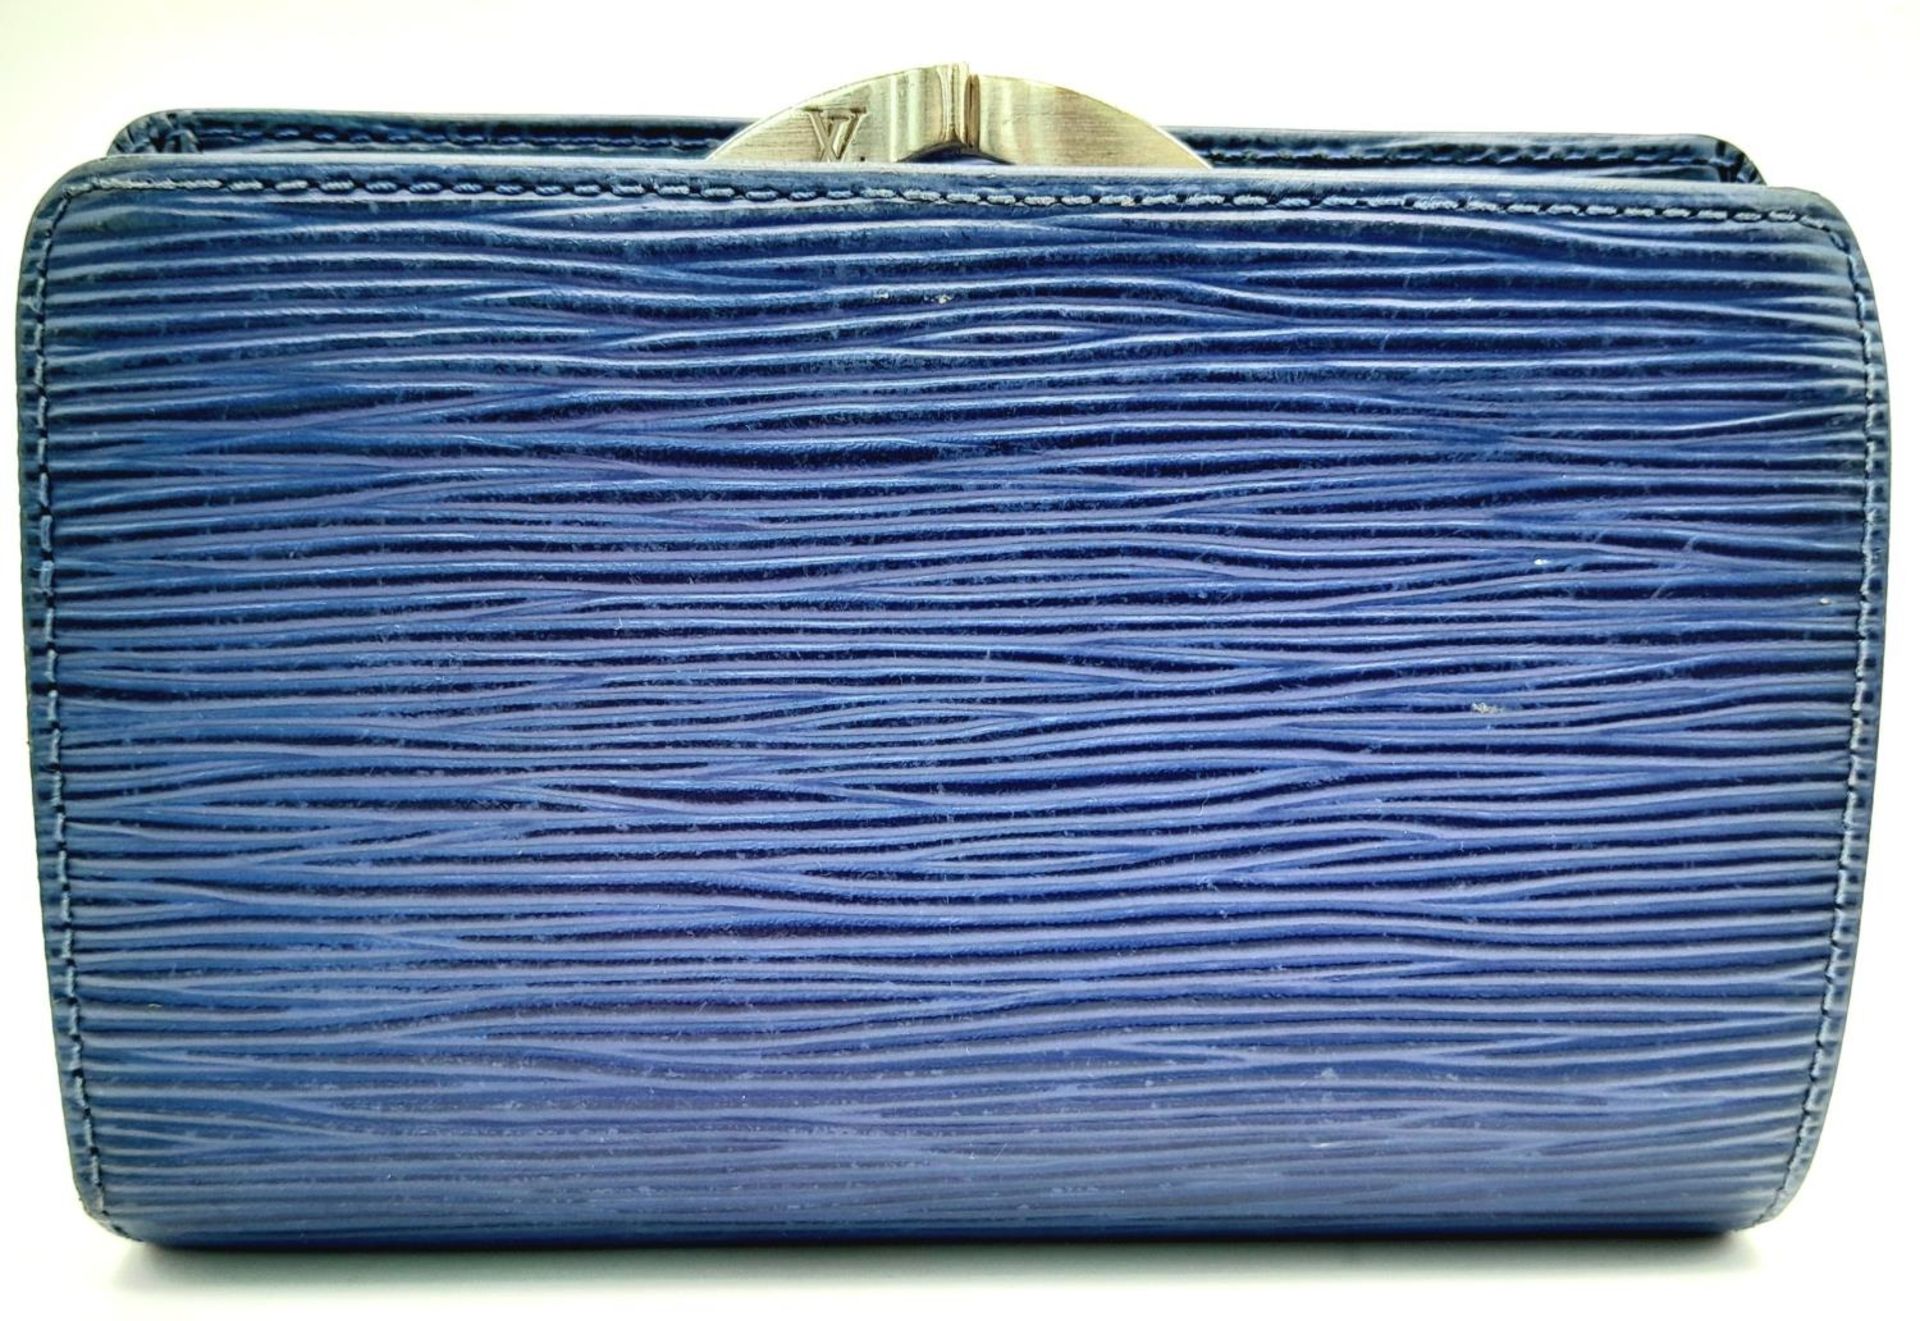 A Vintage Louis Vuitton Blue Bifold Wallet. Epi leather exterior with silver-toned hardware and